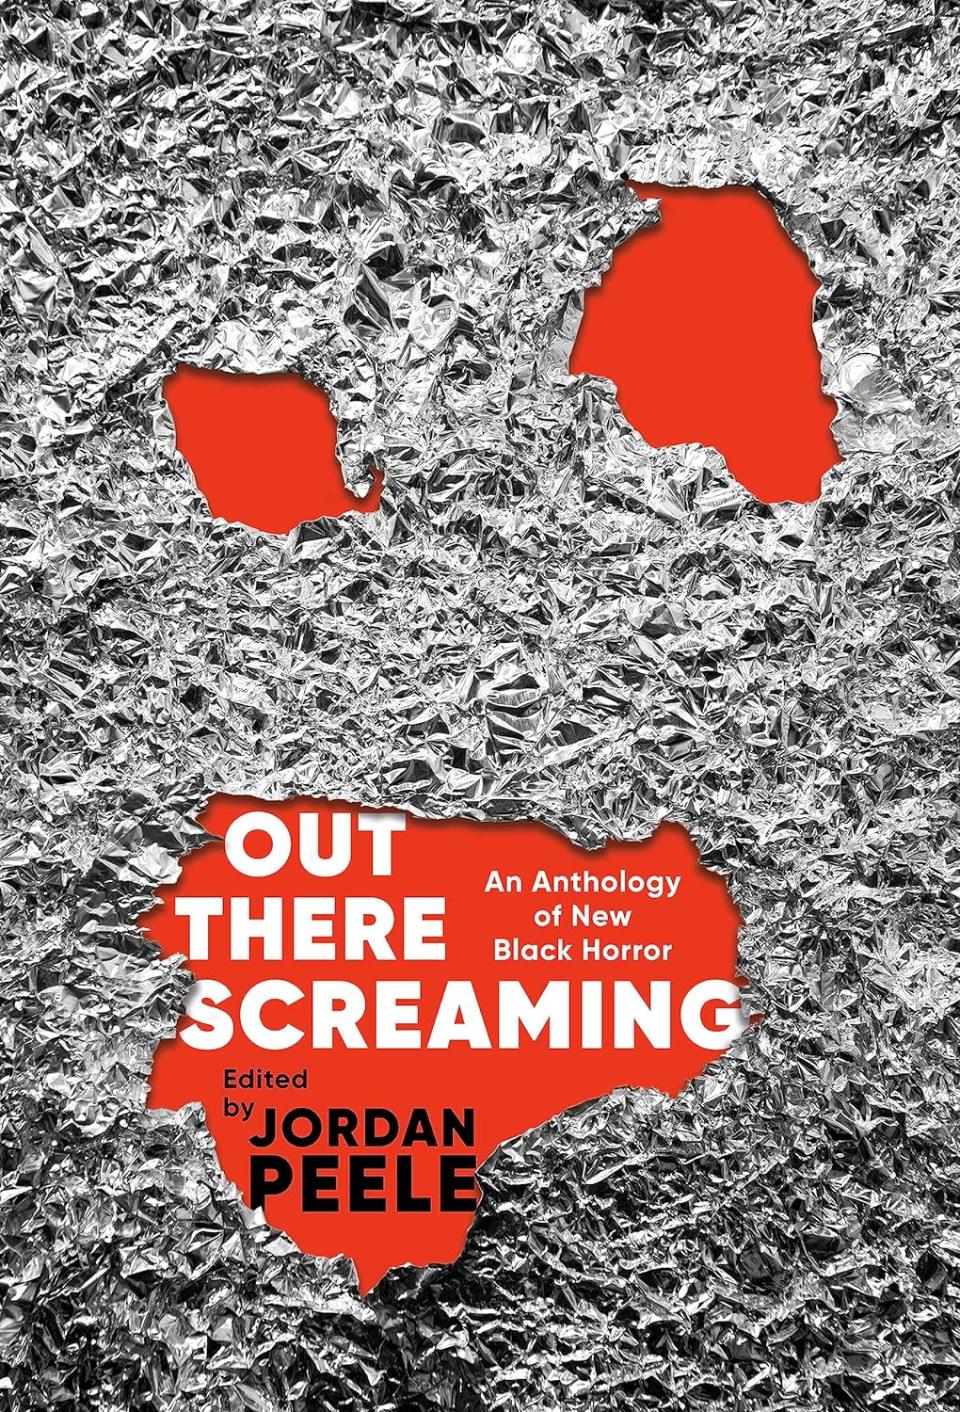 Out There Screaming: An Anthology of New Black Horror by Jordan Peele in hardcover